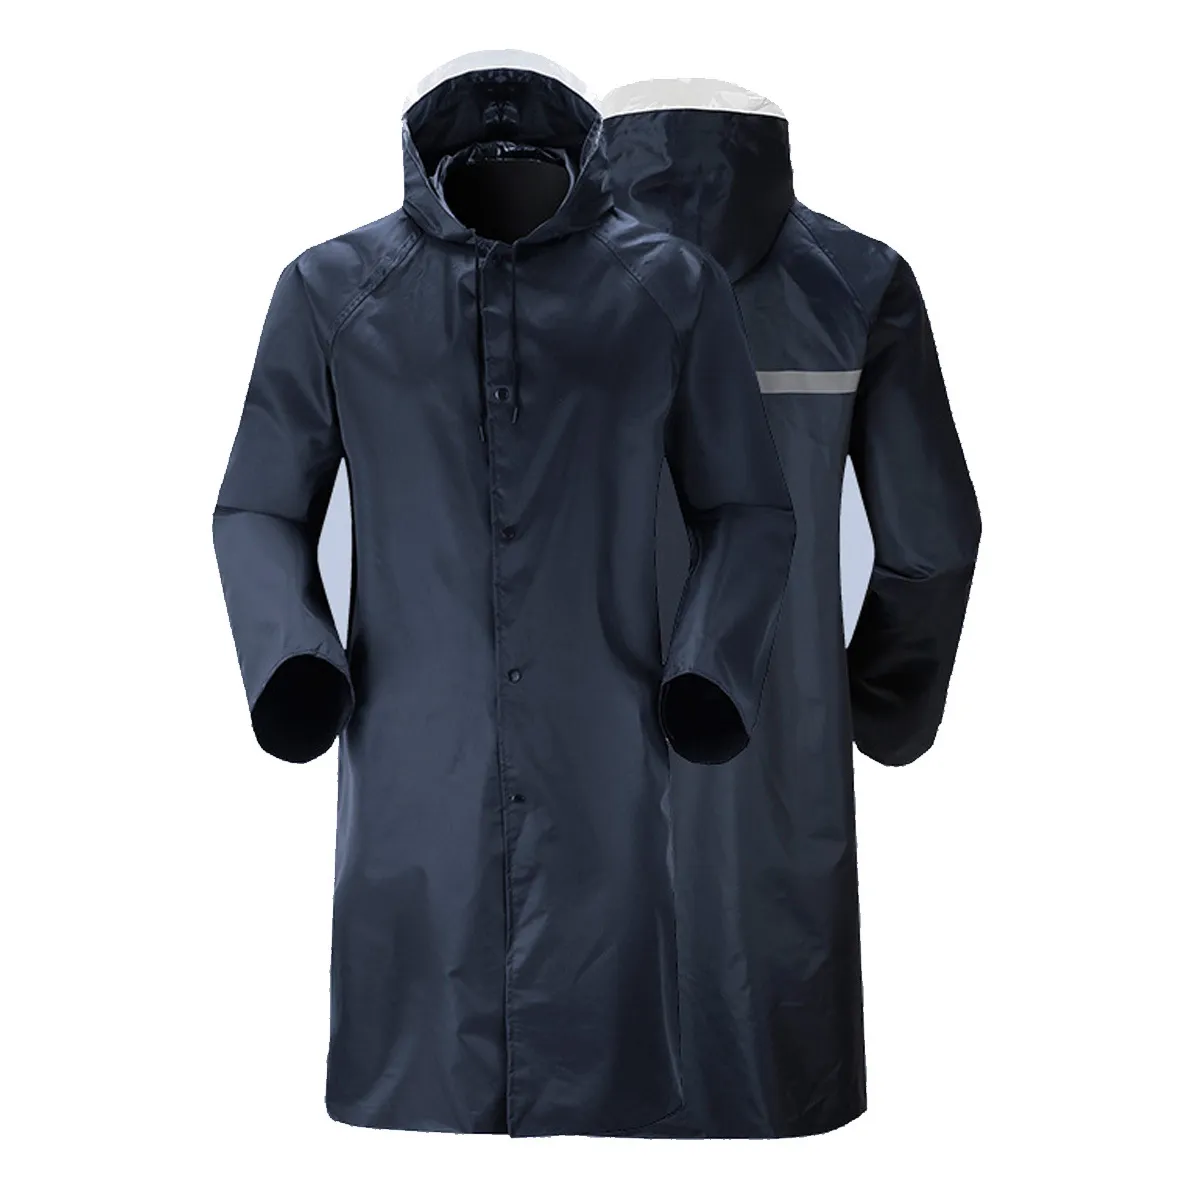 Reflective Strip Waterproof Raincoat For Men  For Men And Women Ideal  For Outdoor Activities Like Fishing, Hiking, And Night Safety From Luo09,  $17.93